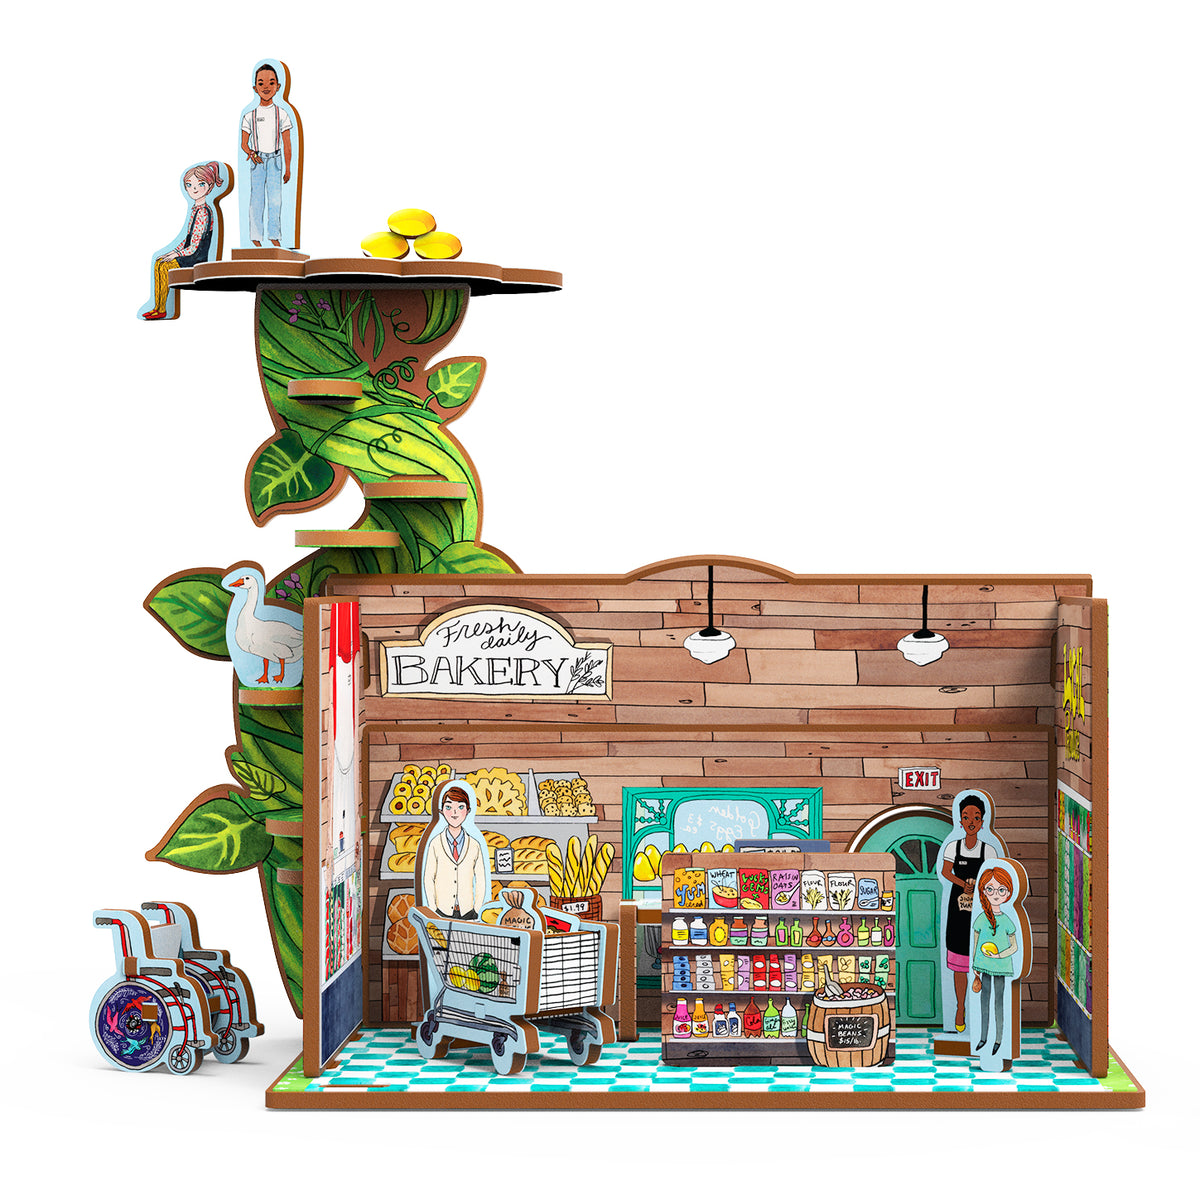 Jack and the Giant&#39;s Grocery Store and Beanstalk